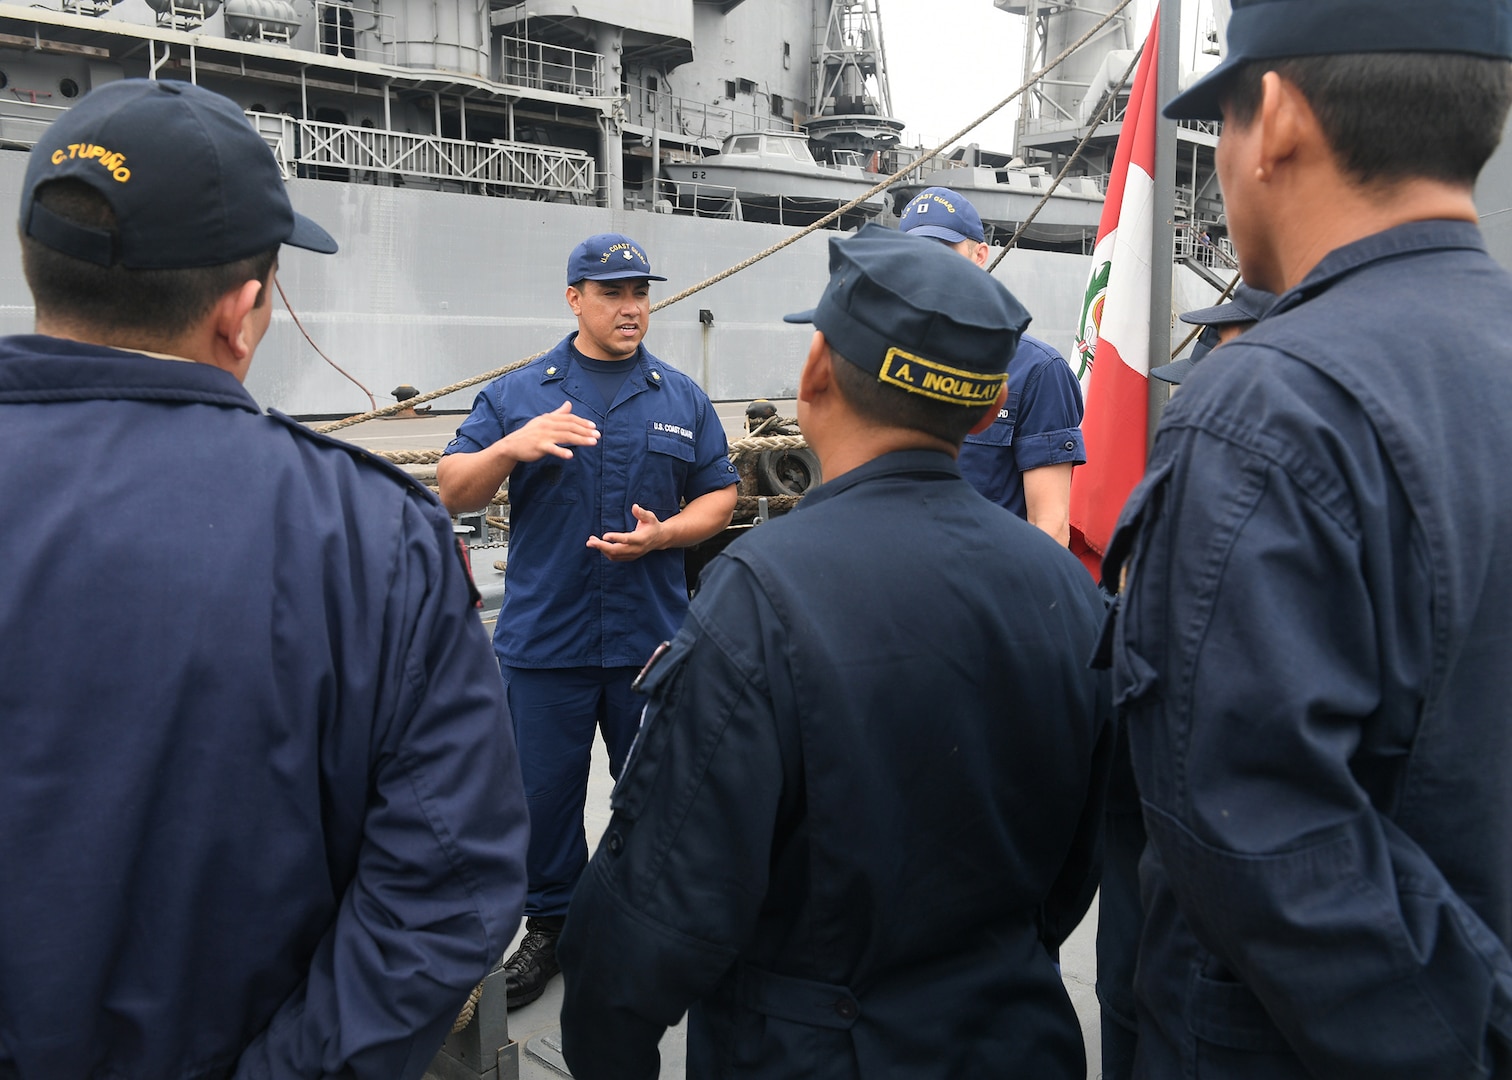 LIMA, Peru (July 16, 2917) - U.S. Coast Guard Maritime Enforcement Specialist 2nd Class Juan Leon conducts a maritime law enforcement symposium with UNITAS partner nation participants from Mexico, Peru, Honduras and Chile onboard a Peruvian naval vessel. UNITAS is an annual exercise that focuses on strengthening our existing regional partnerships and encourages establishing new relationships through the exchange of maritime mission-focused knowledge and expertise throughout the exercise. (U.S. Navy photo by Mass Communication Specialist 2nd Class Michael Hendricks/Released)